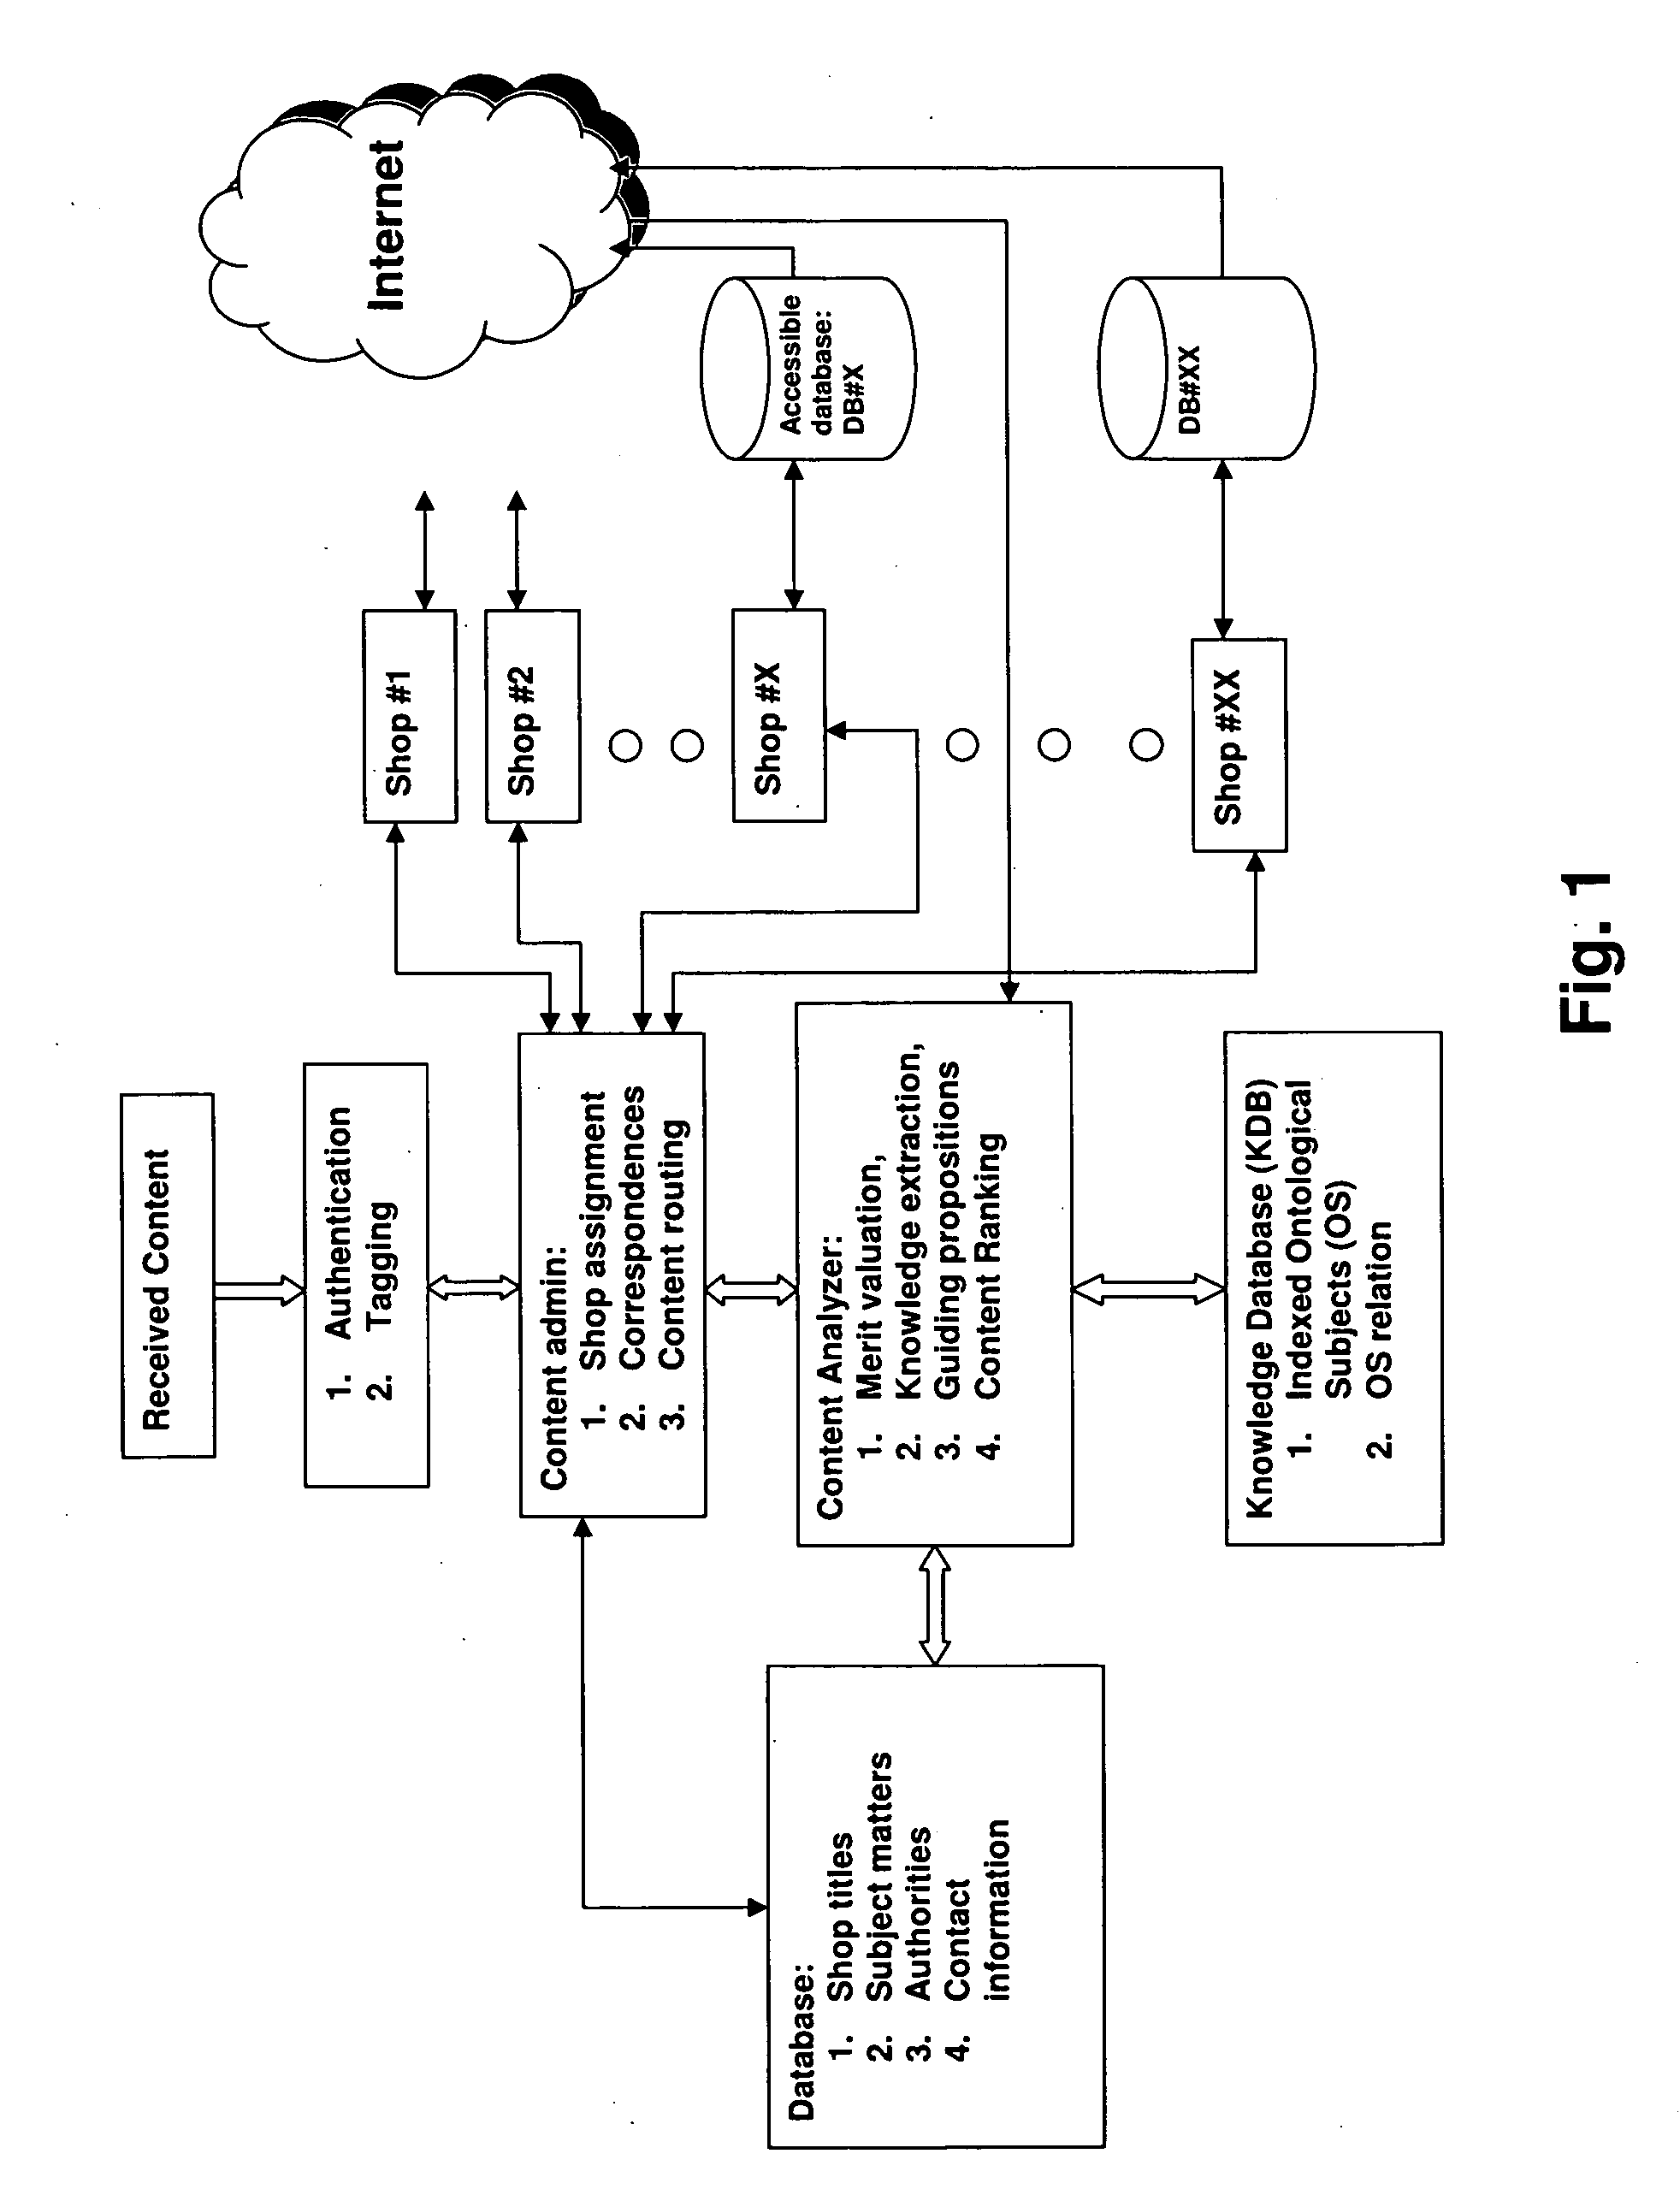 Assissted Knowledge Discovery and Publication System and Method